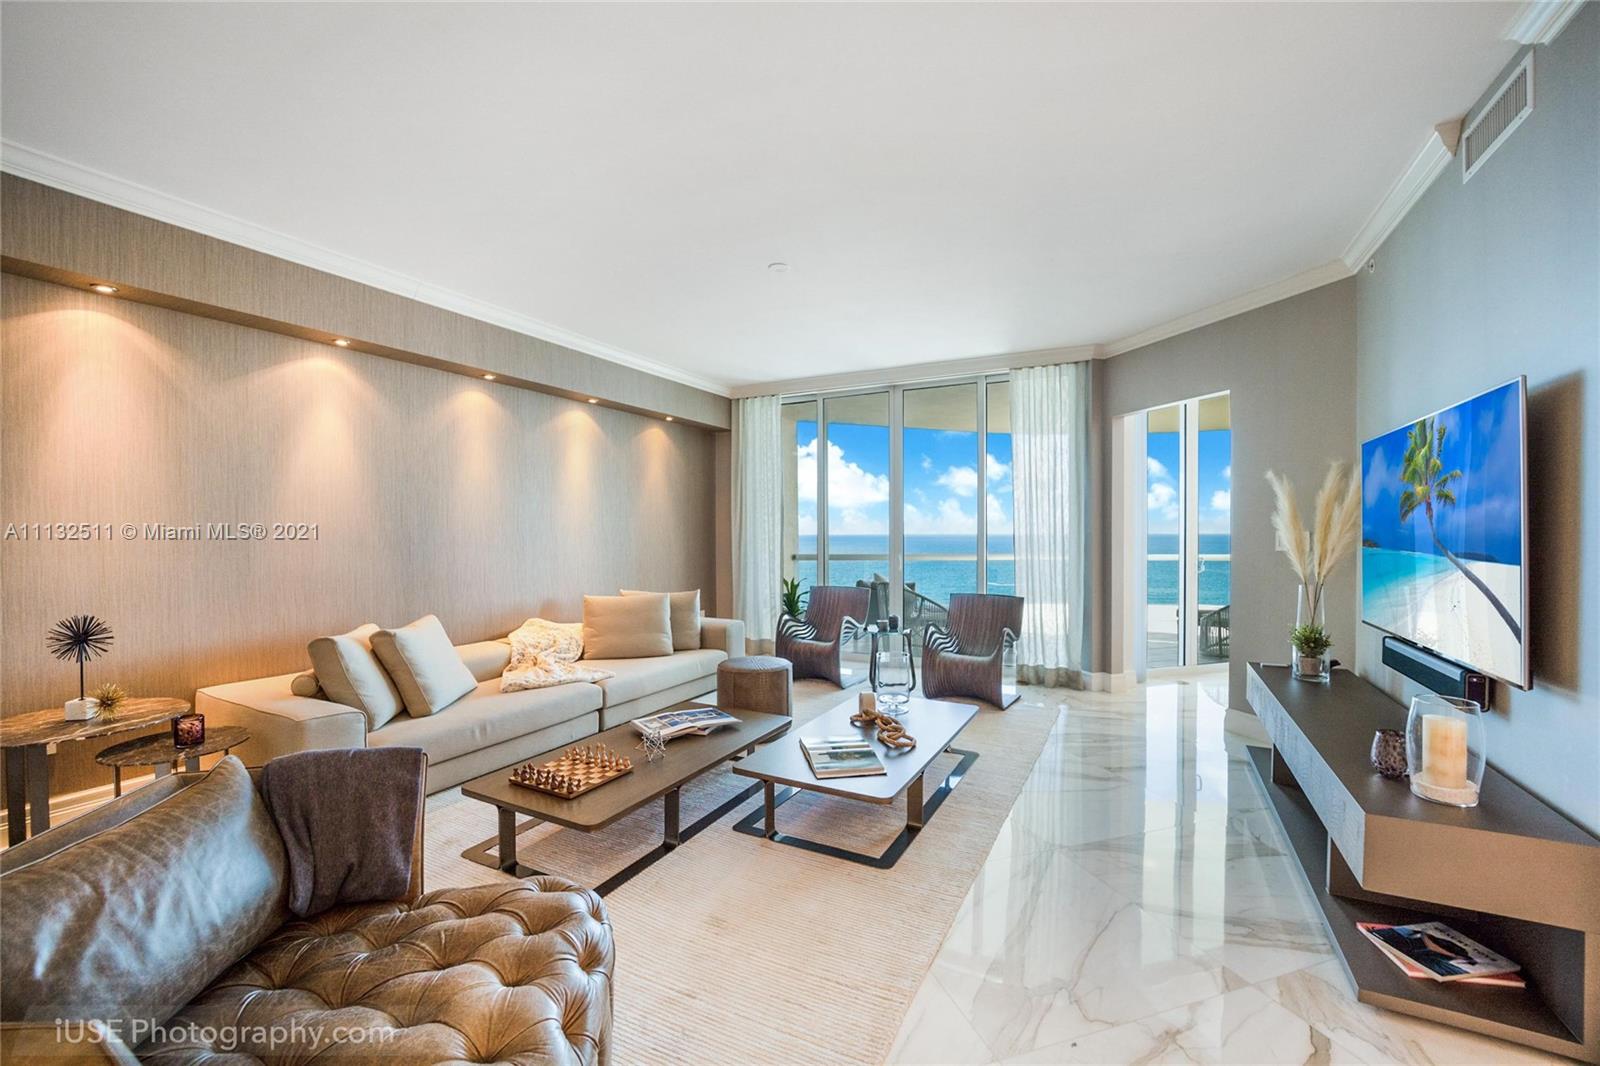 Turnberry Ocean Colony image #2